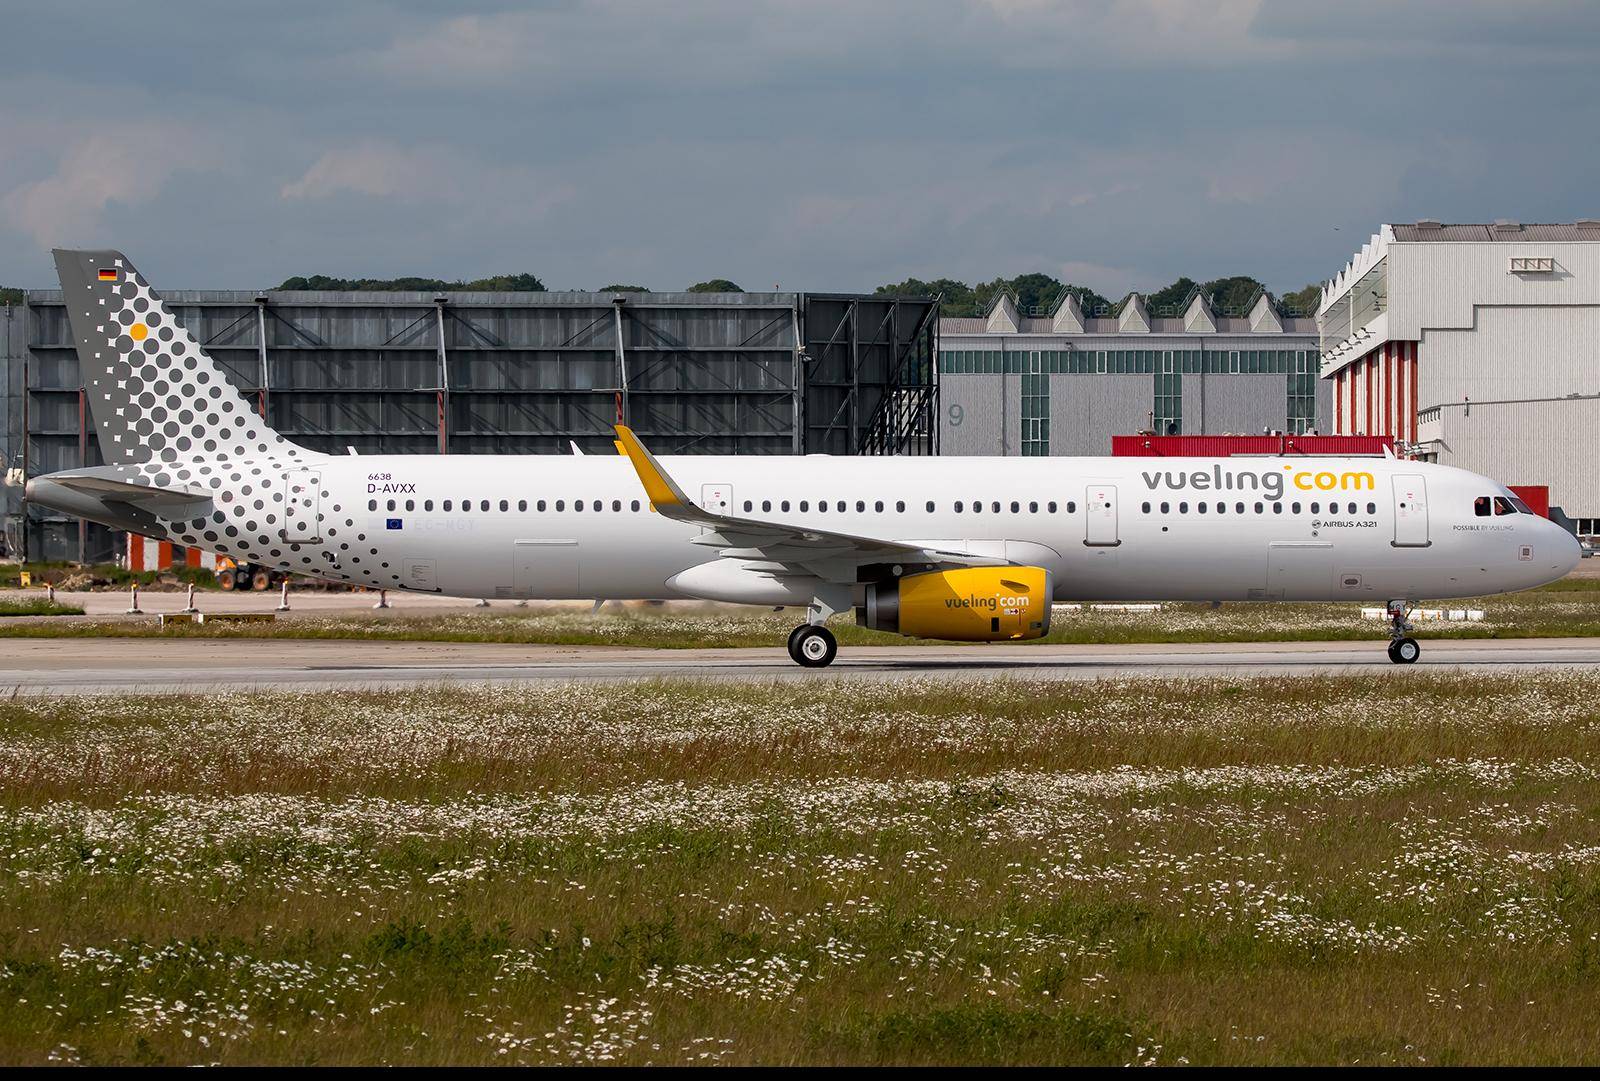 Vueling route map and destinations - flightconnections